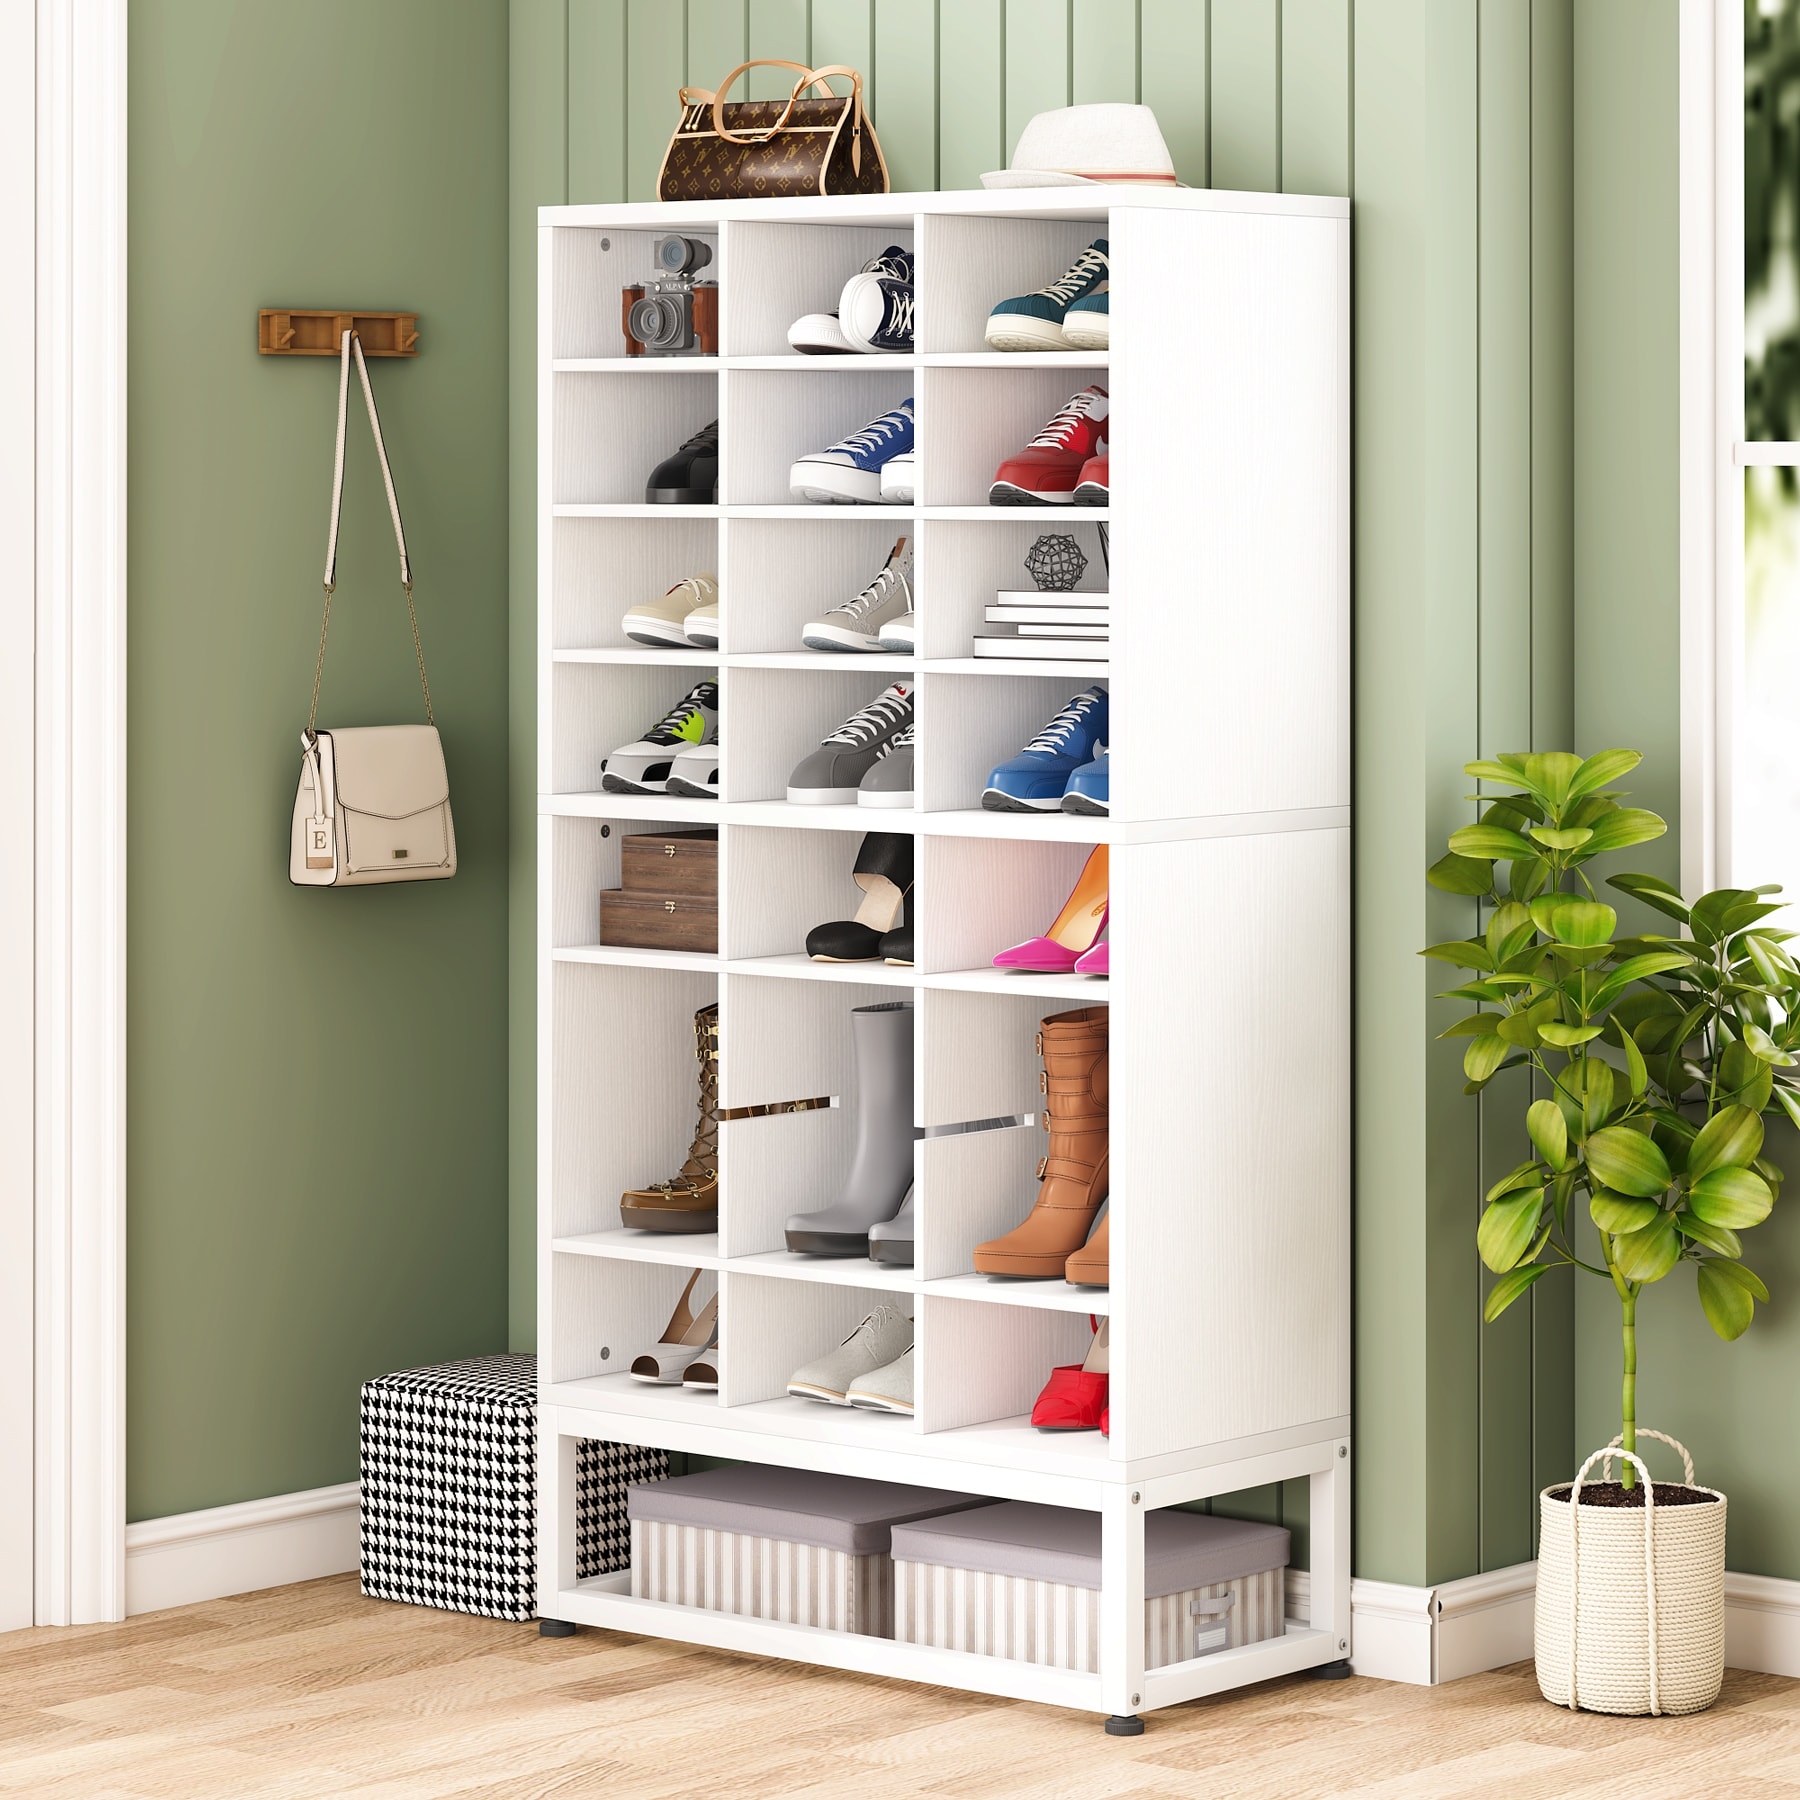 https://ak1.ostkcdn.com/images/products/is/images/direct/5554227292f996ea2367a3d2d499a14299d344b6/White-24-Pair-Shoe-Storage-Cabinet%2C-8-Tier-Feestanding-Cube-Shoe-Rack-Closet-Organizers-for-Bedroom%2C-Hallway.jpg